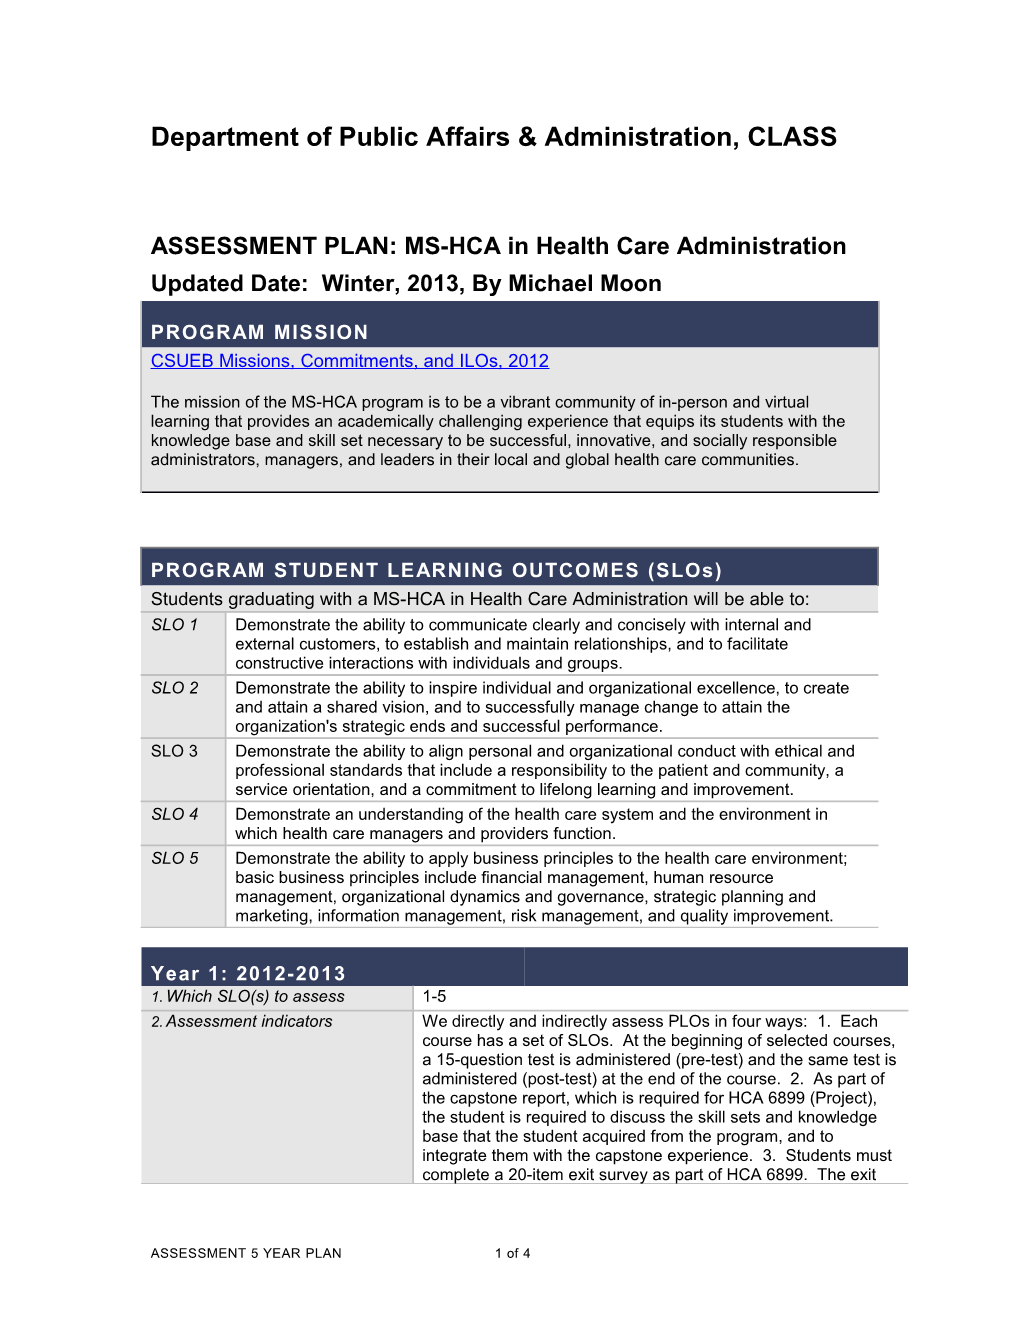 ASSESSMENT PLAN: MS-HCA in Health Care Administration